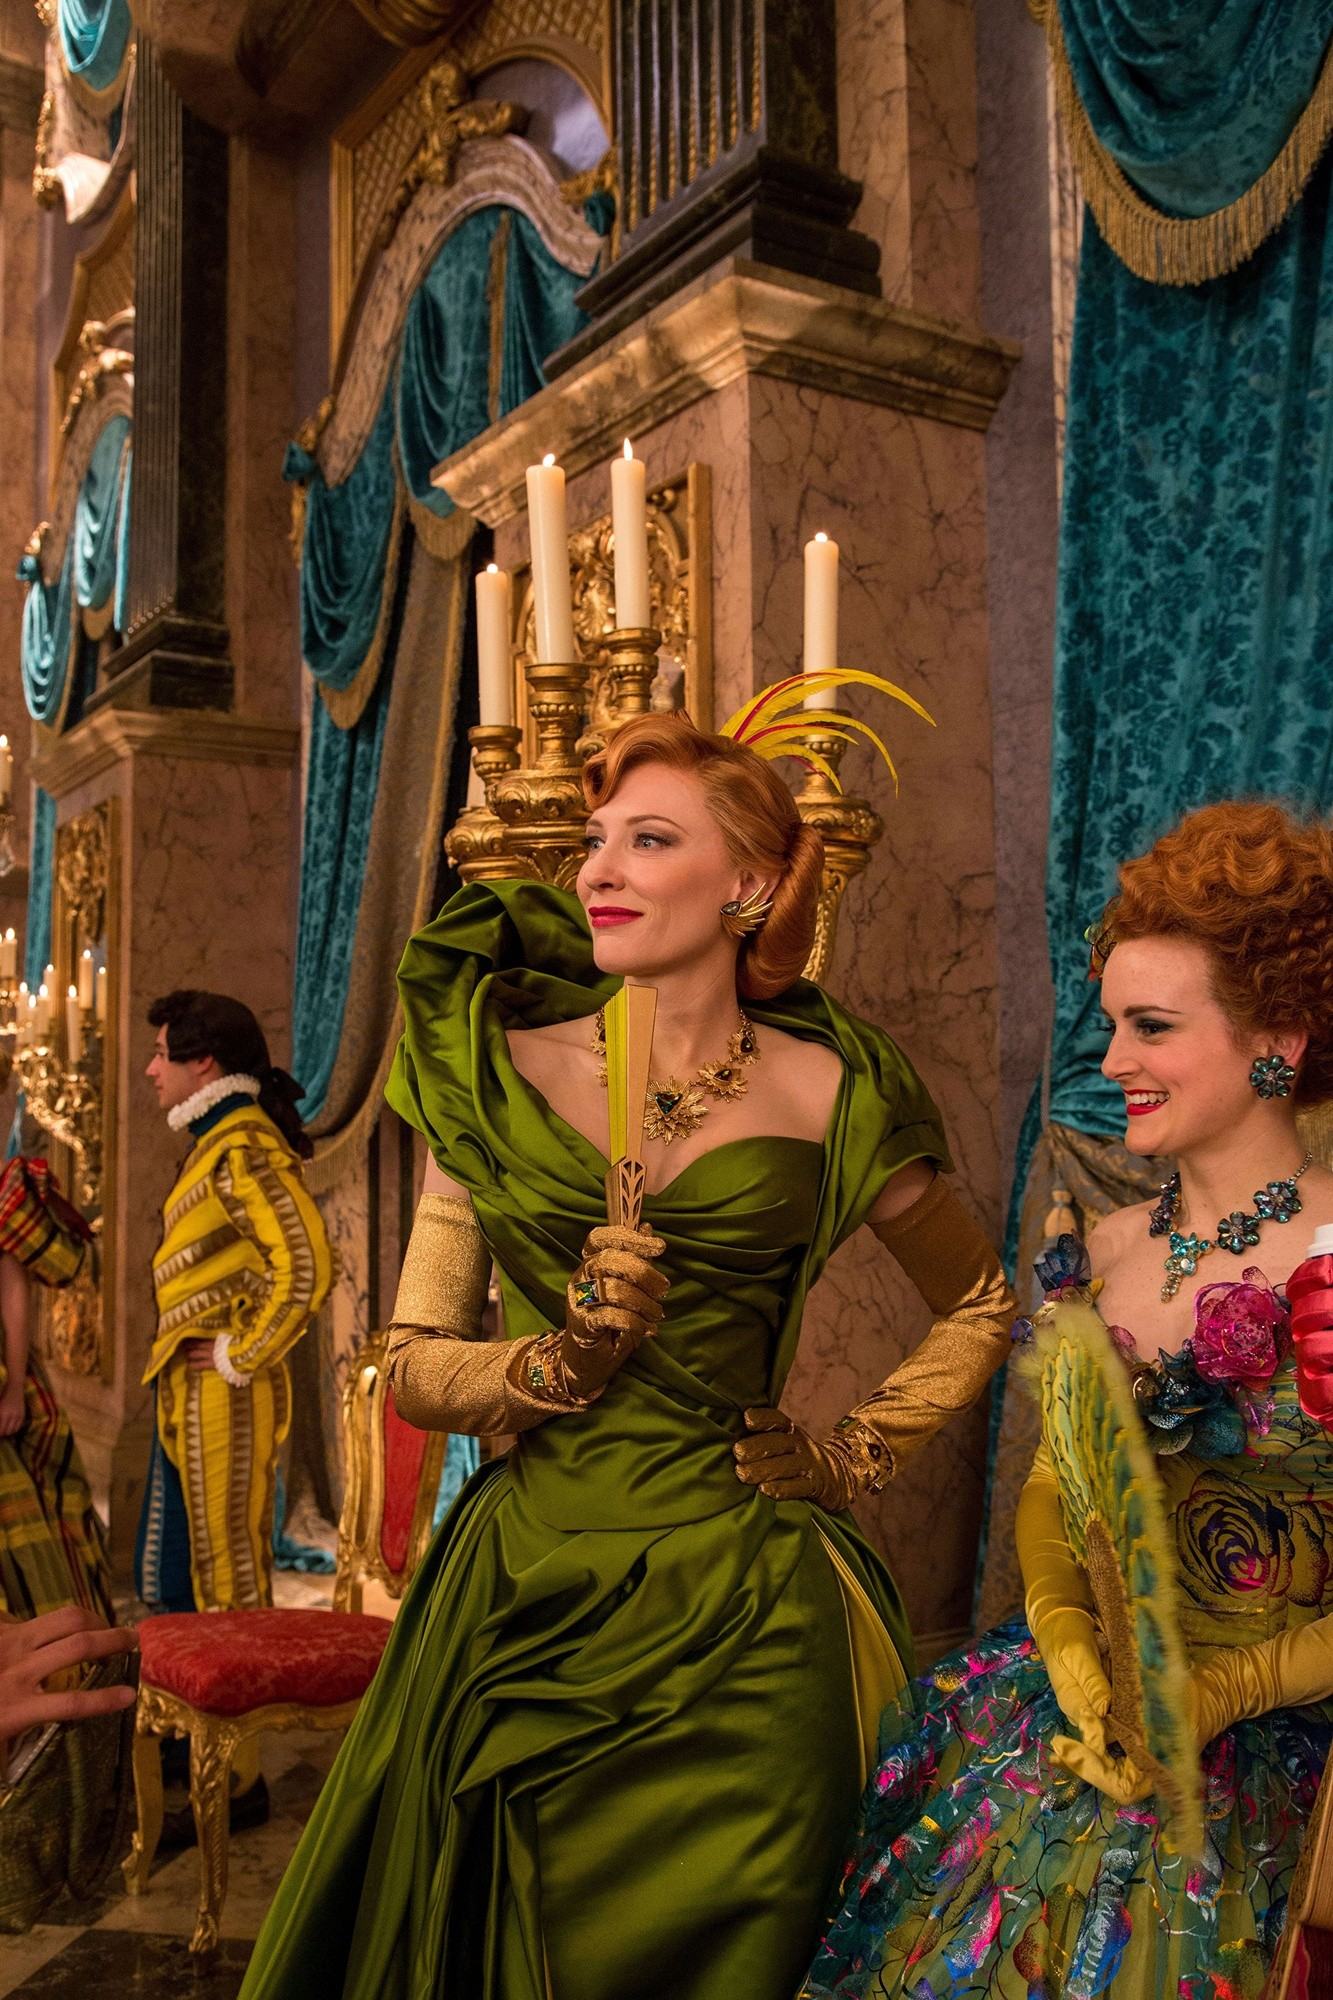 Cate Blanchett stars as Lady Tremaine and Sophie McShera stars as Drizella in Walt Disney Pictures' Cinderella (2015)